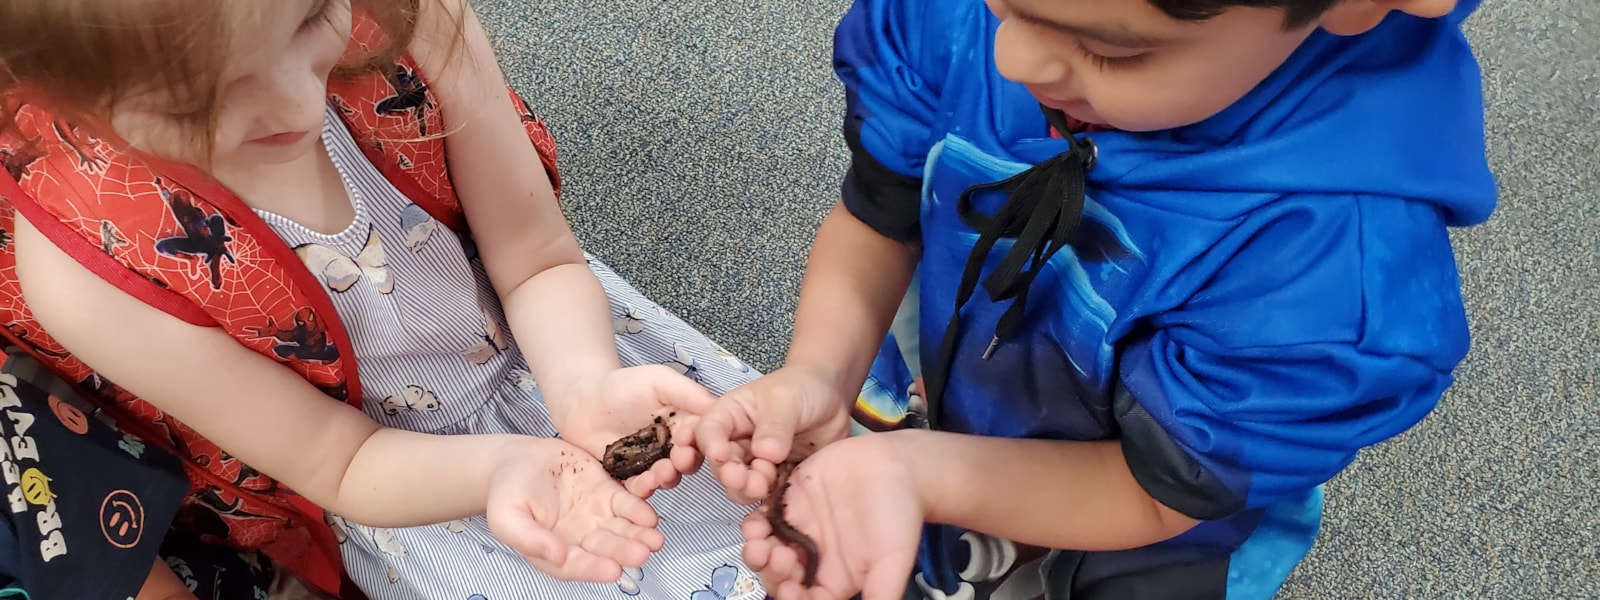 students holding earthworms.